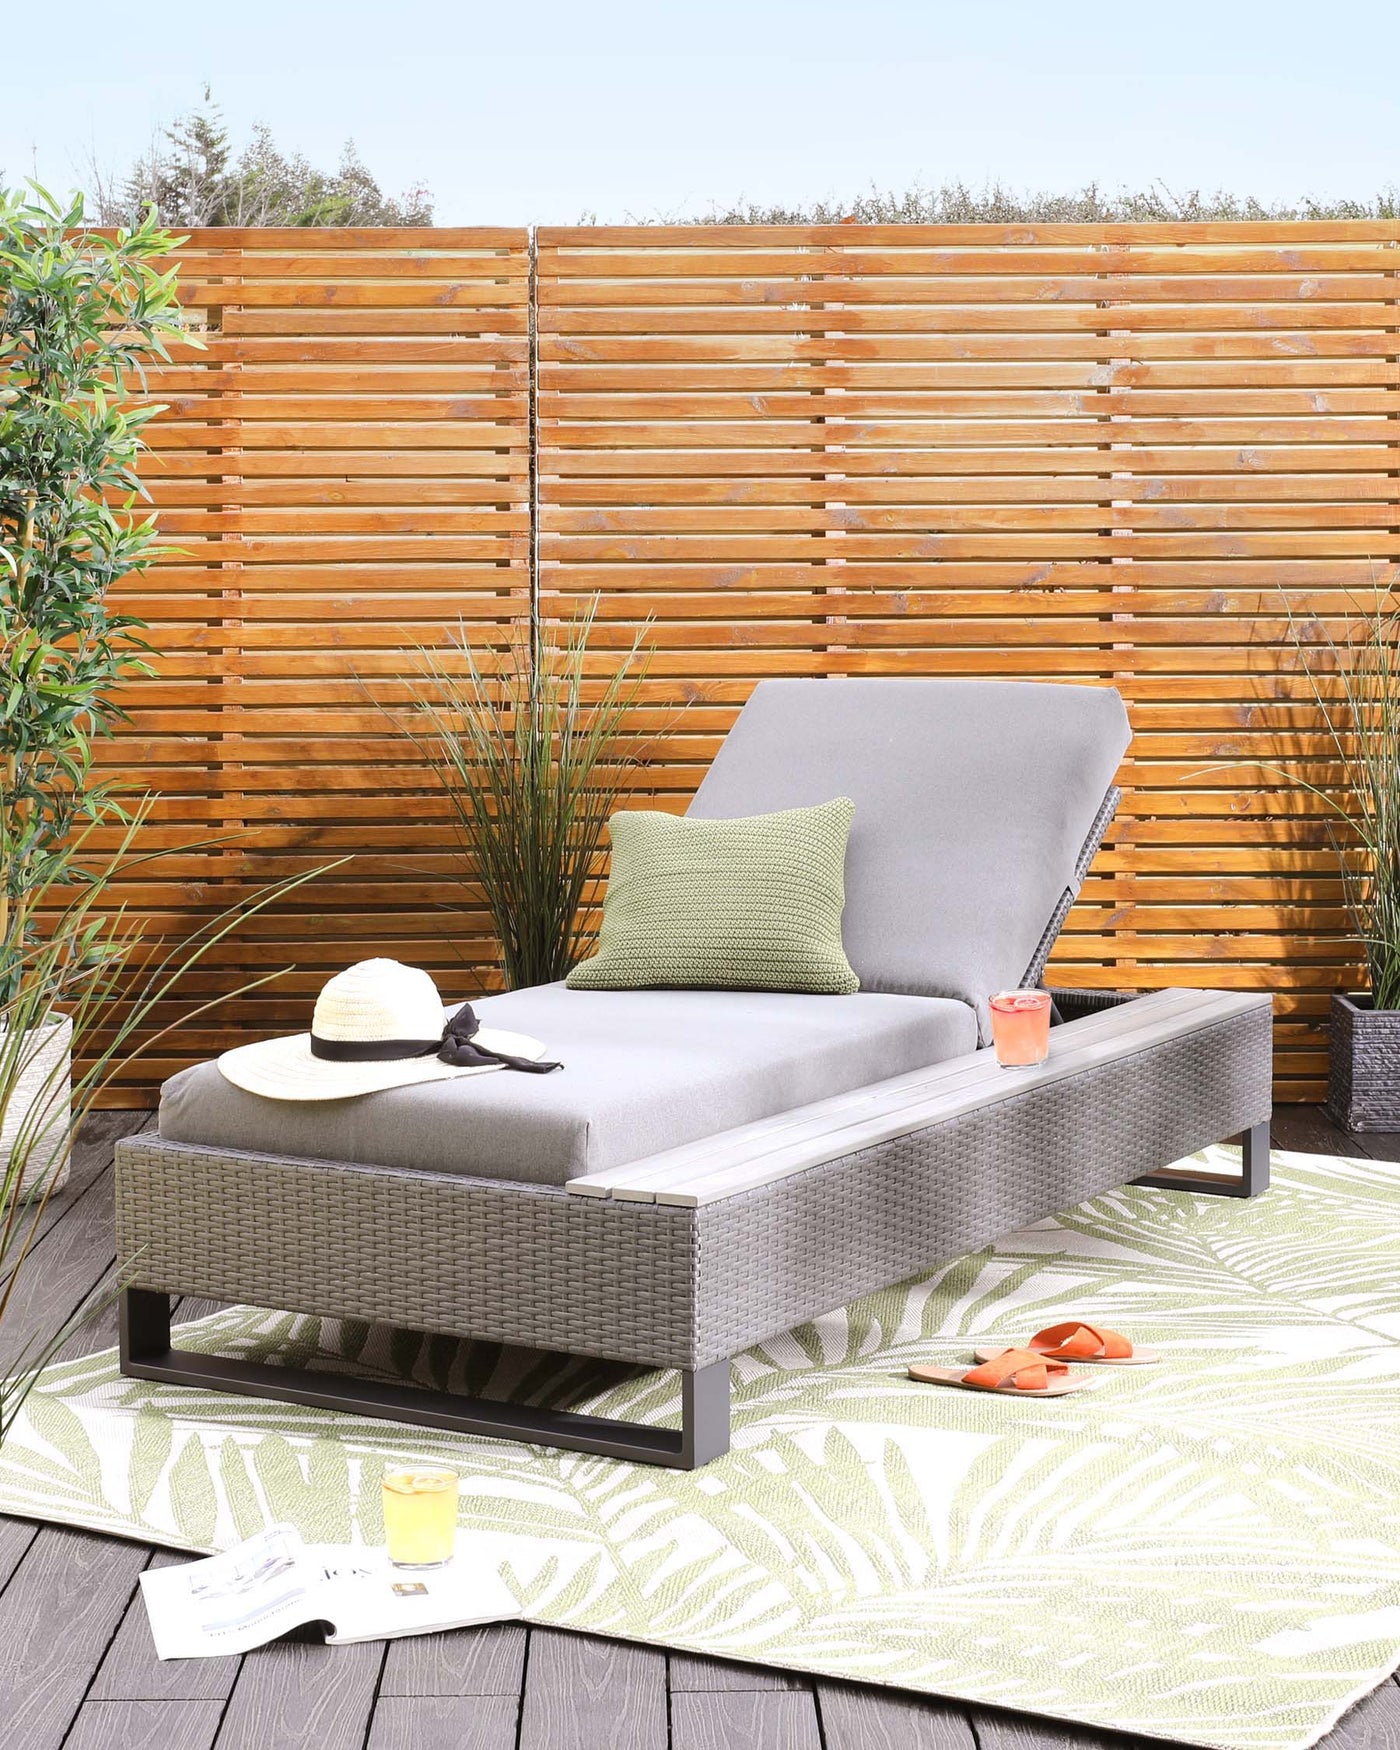 Contemporary outdoor furniture featuring a wicker chaise lounge with a grey cushion and pillow, accompanied by a matching wicker coffee table, set on a green patterned outdoor rug.